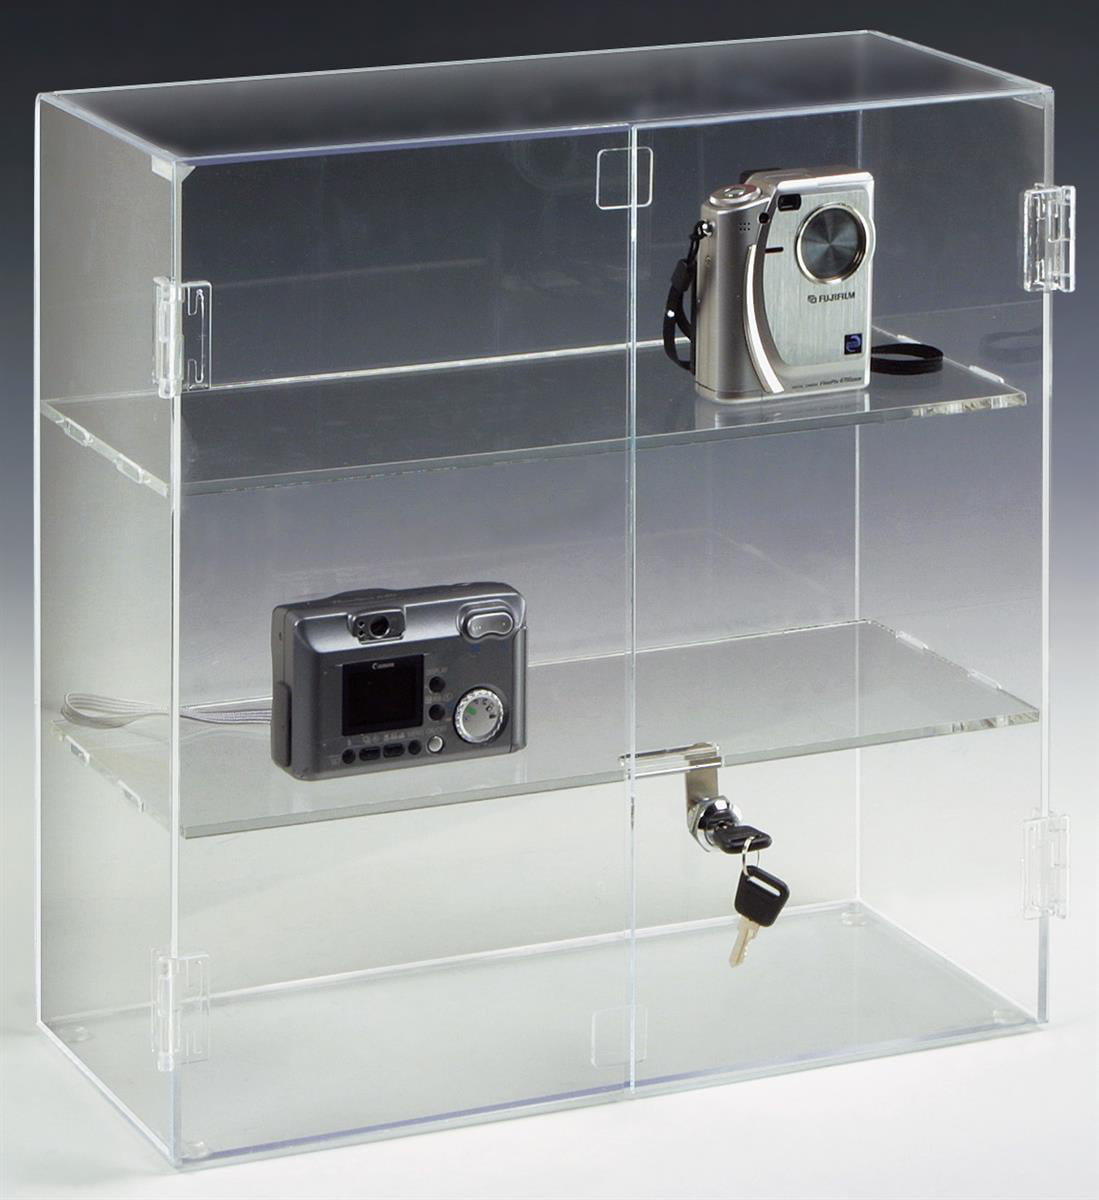 165 X 1625 Countertop Acrylic Display Case With 2 Shelves Locking